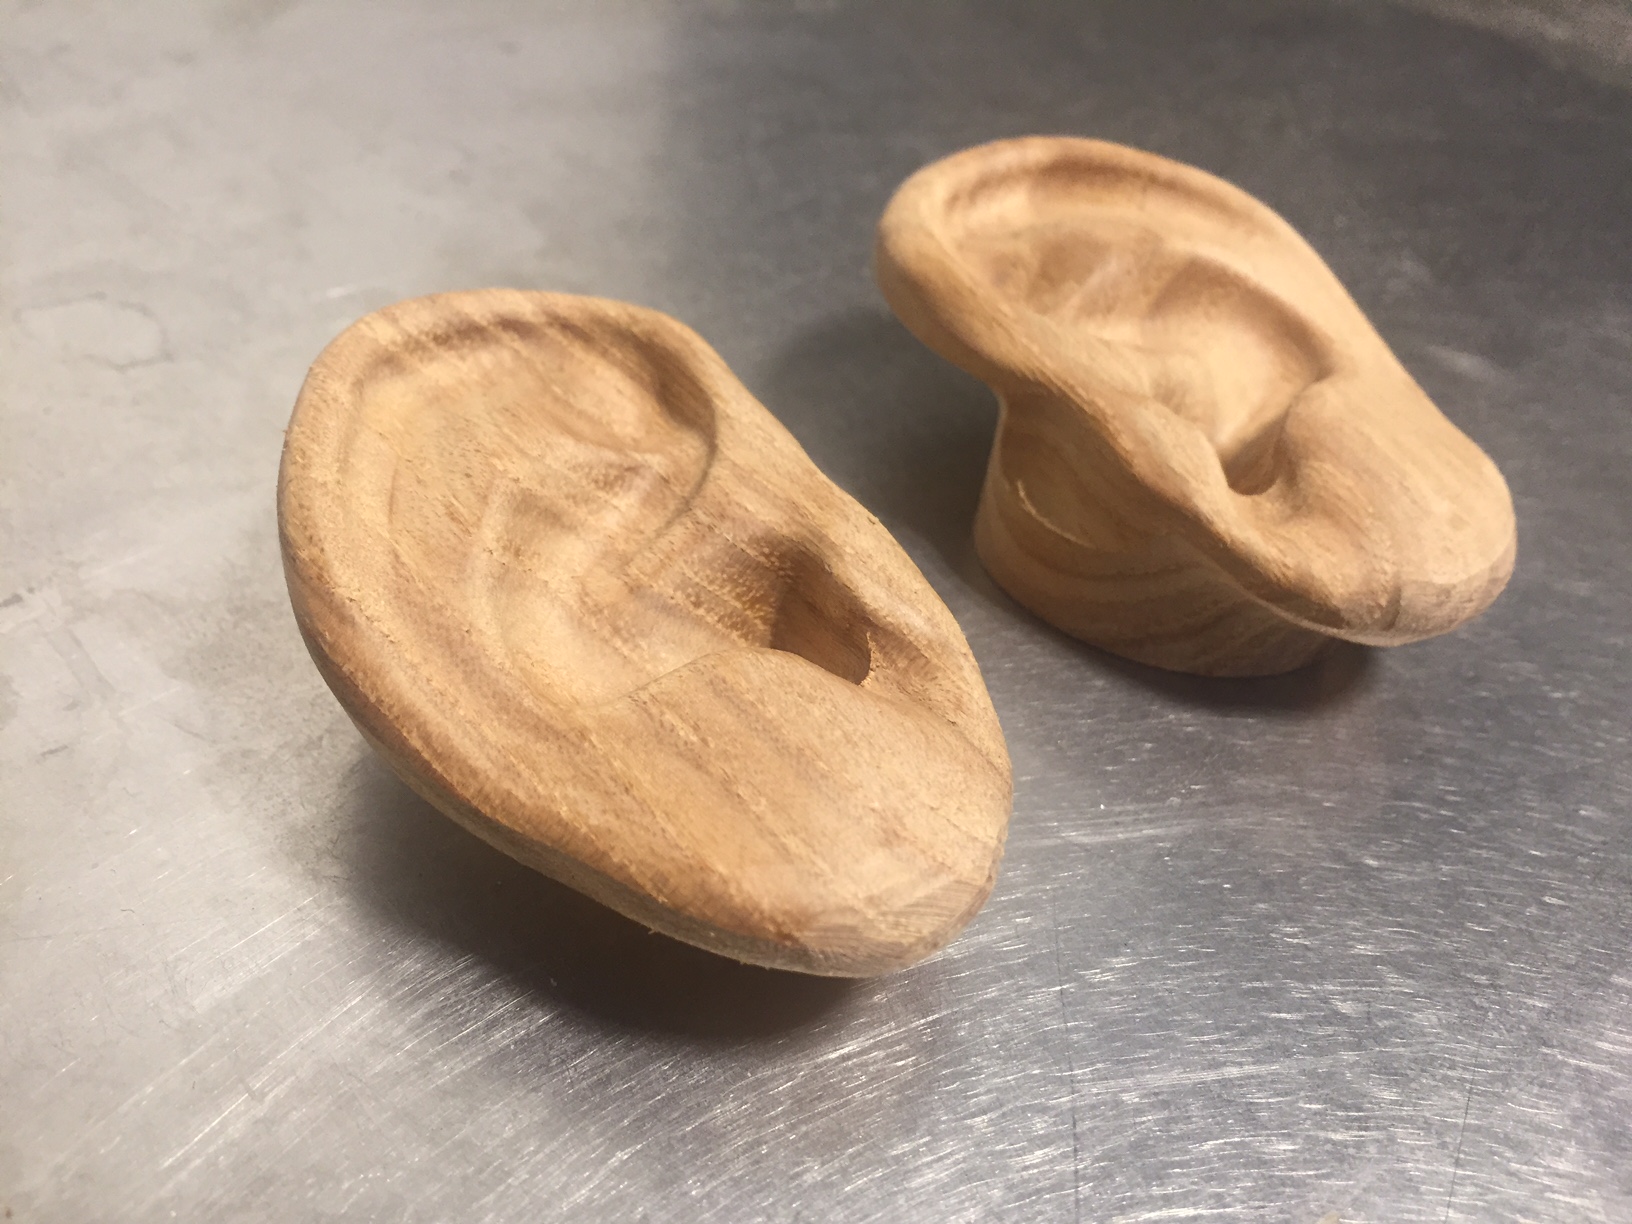 Ben Colbourn – 4 axis milled wood ears